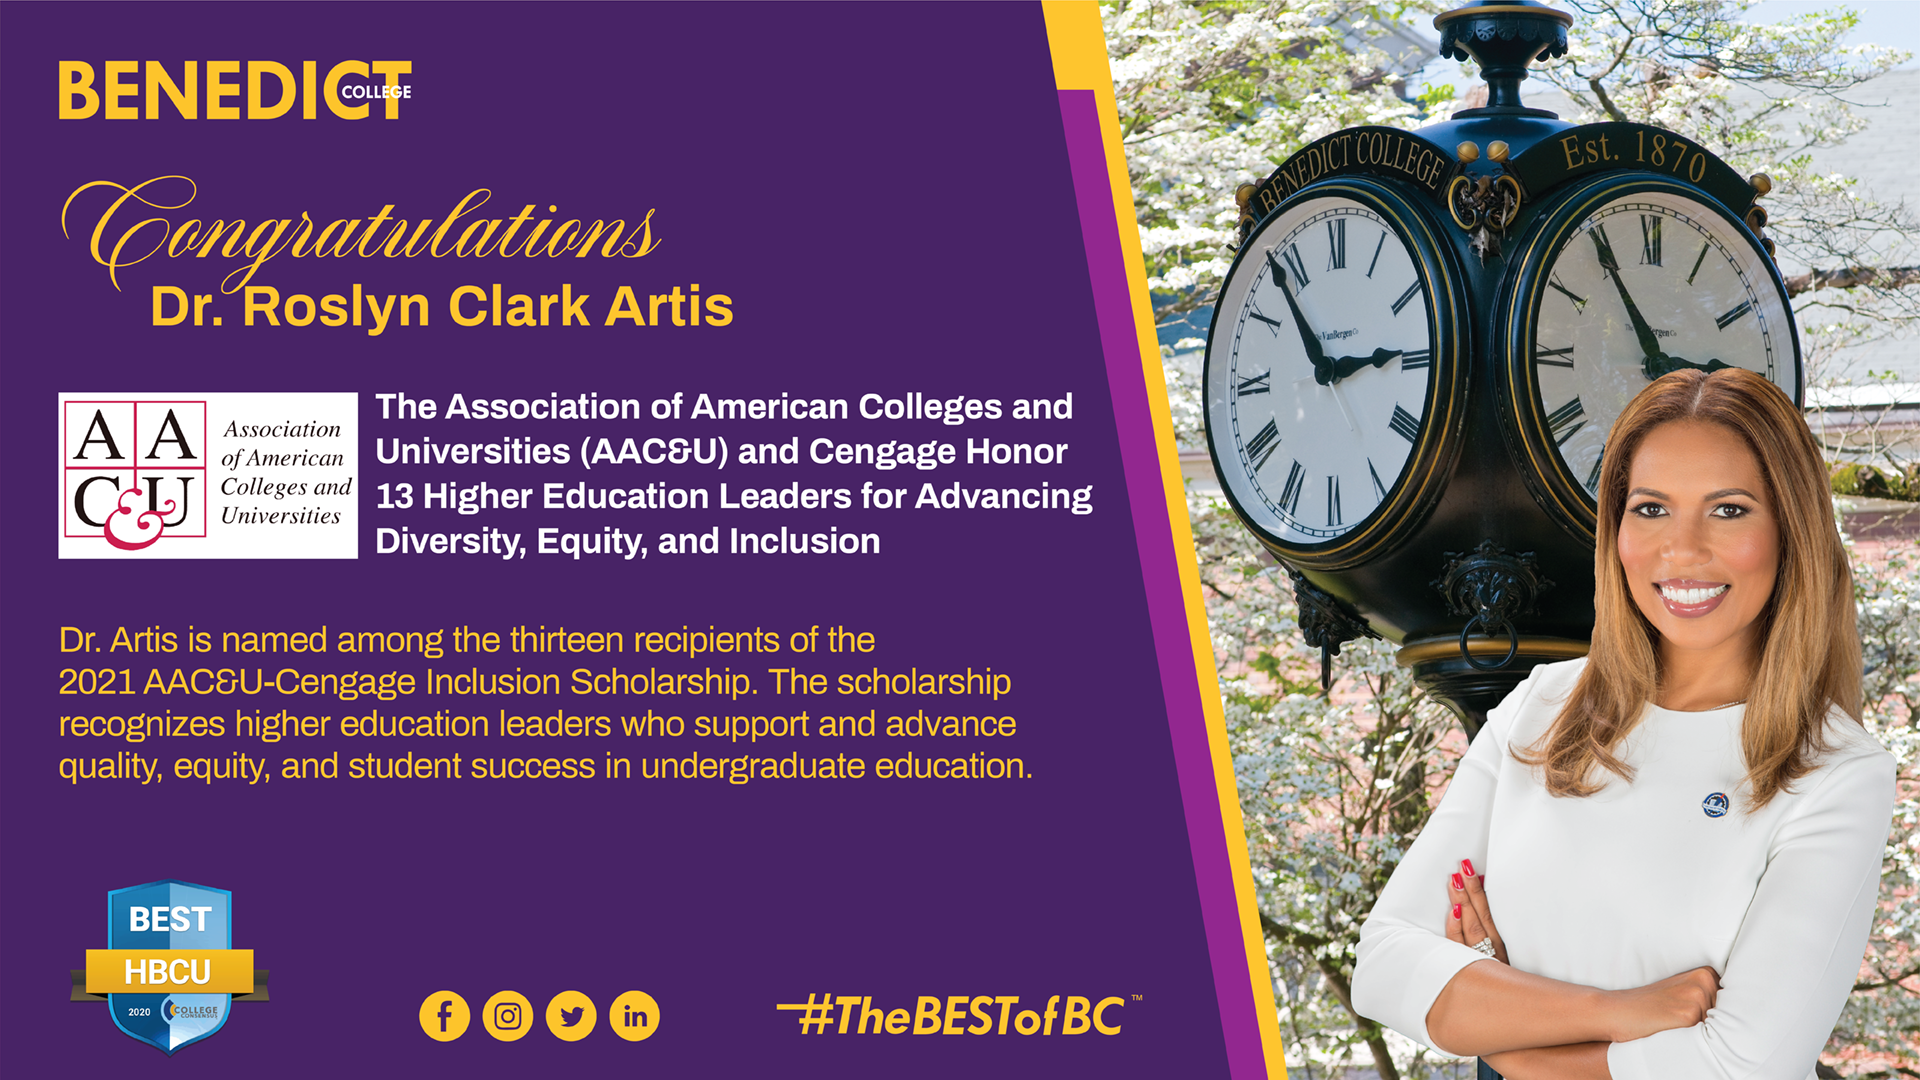 Dr Roslyn Clark Artis President Of Benedict College Among 13 Higher Education Leaders Recognized For Advancing Diversity Equity And Inclusion By The Association Of American Colleges And Universities c U And Cengage